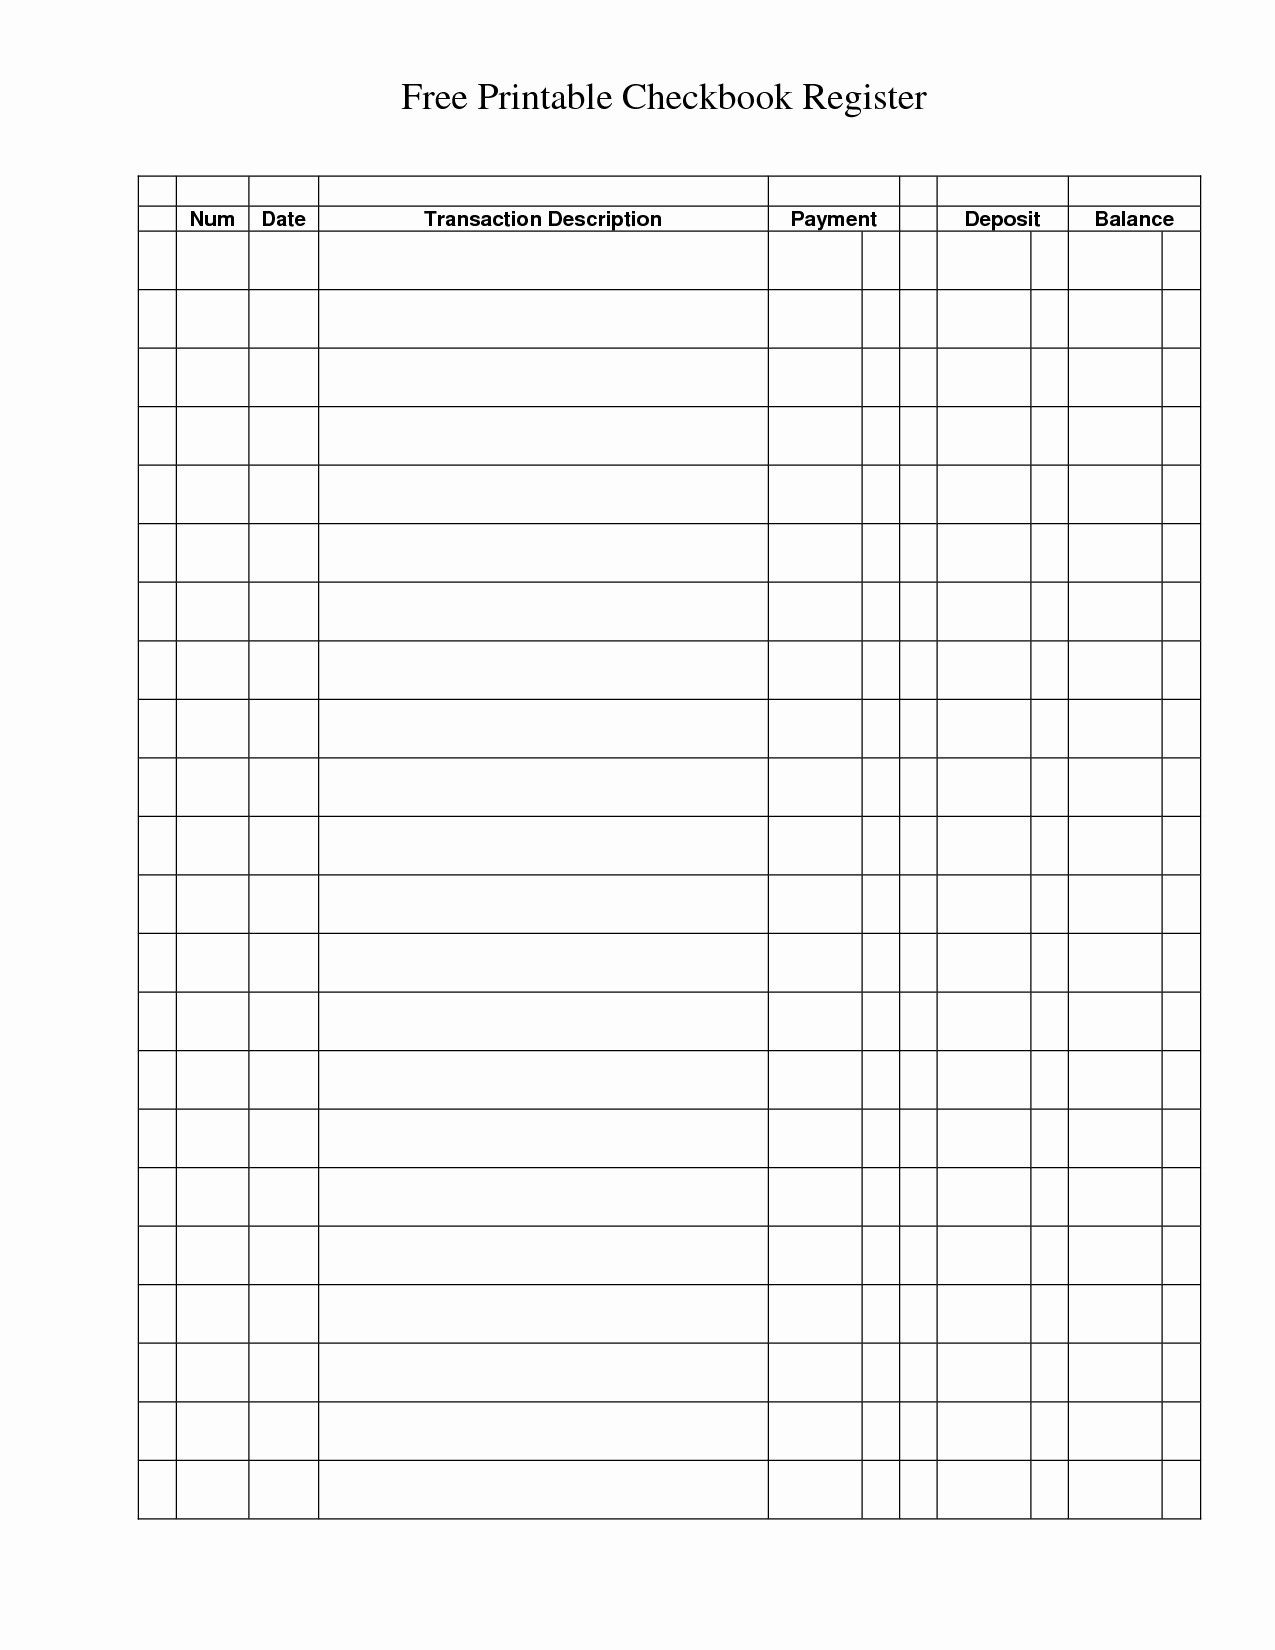 balancing-a-checkbook-worksheet-for-students-db-excel